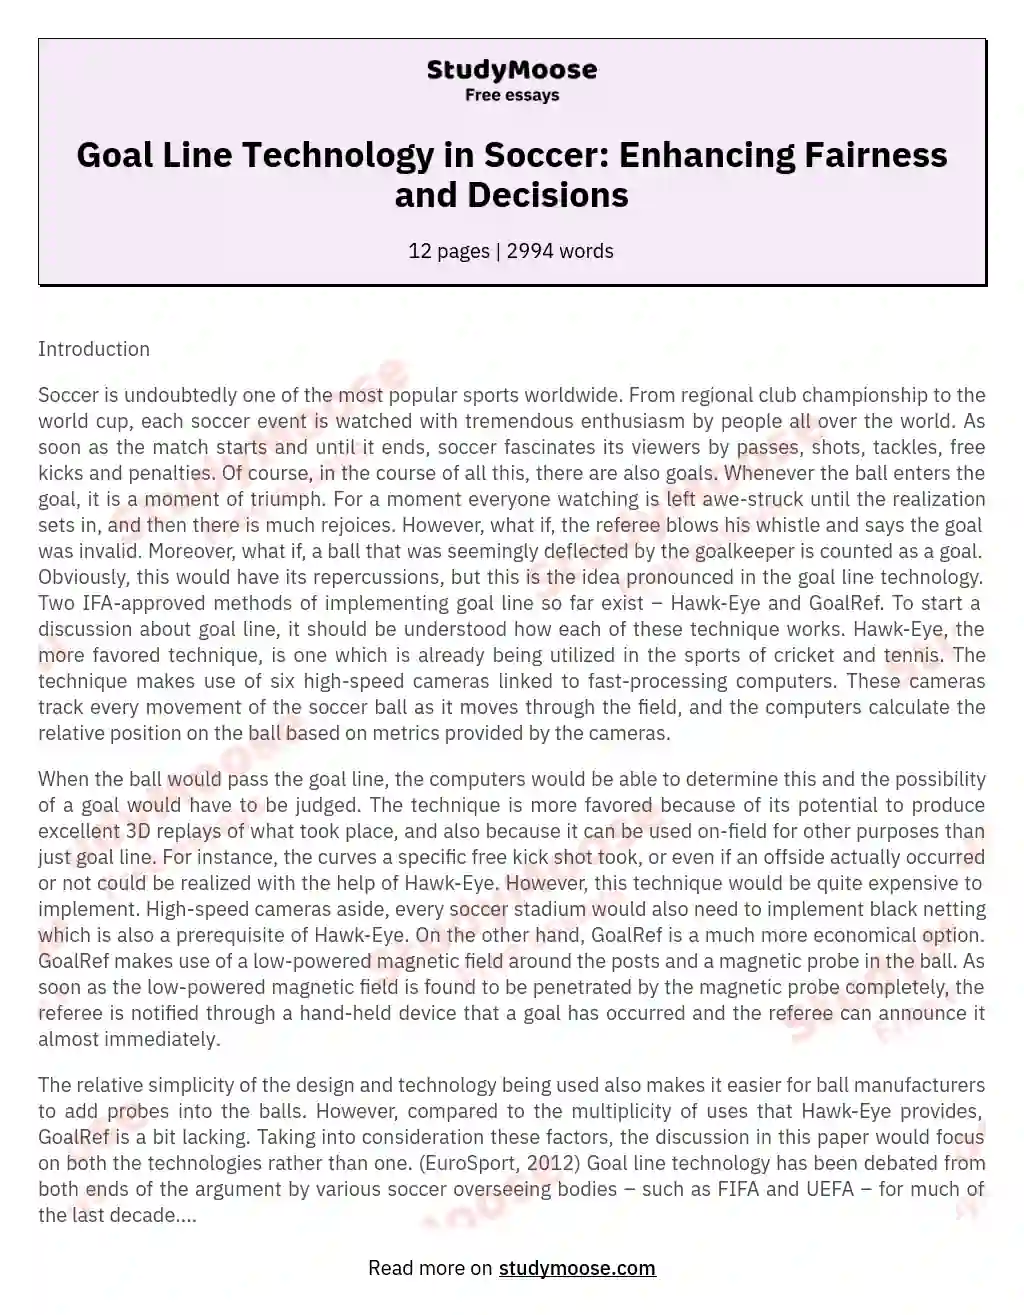 Goal Line Technology in Soccer: Enhancing Fairness and Decisions essay